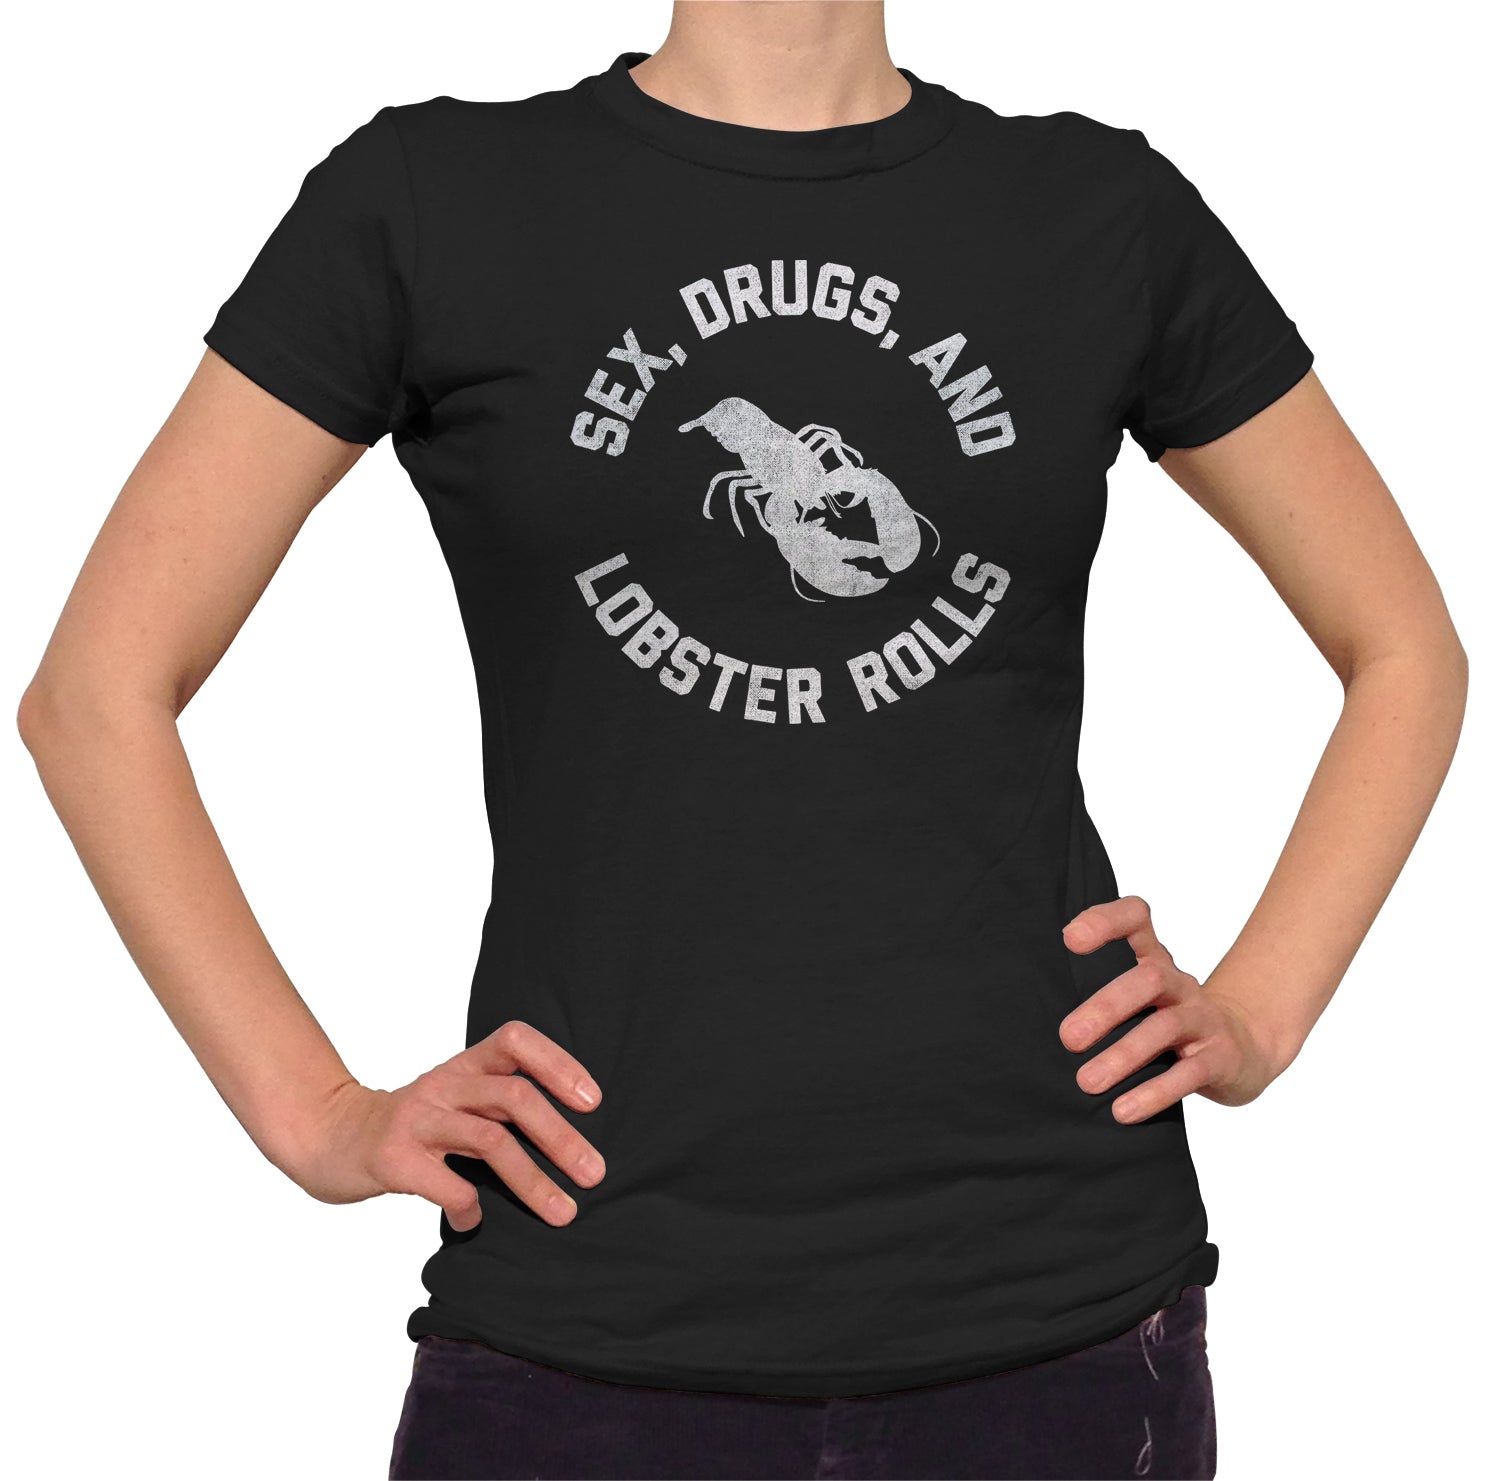 Women's Sex Drugs and Lobster Rolls T-Shirt